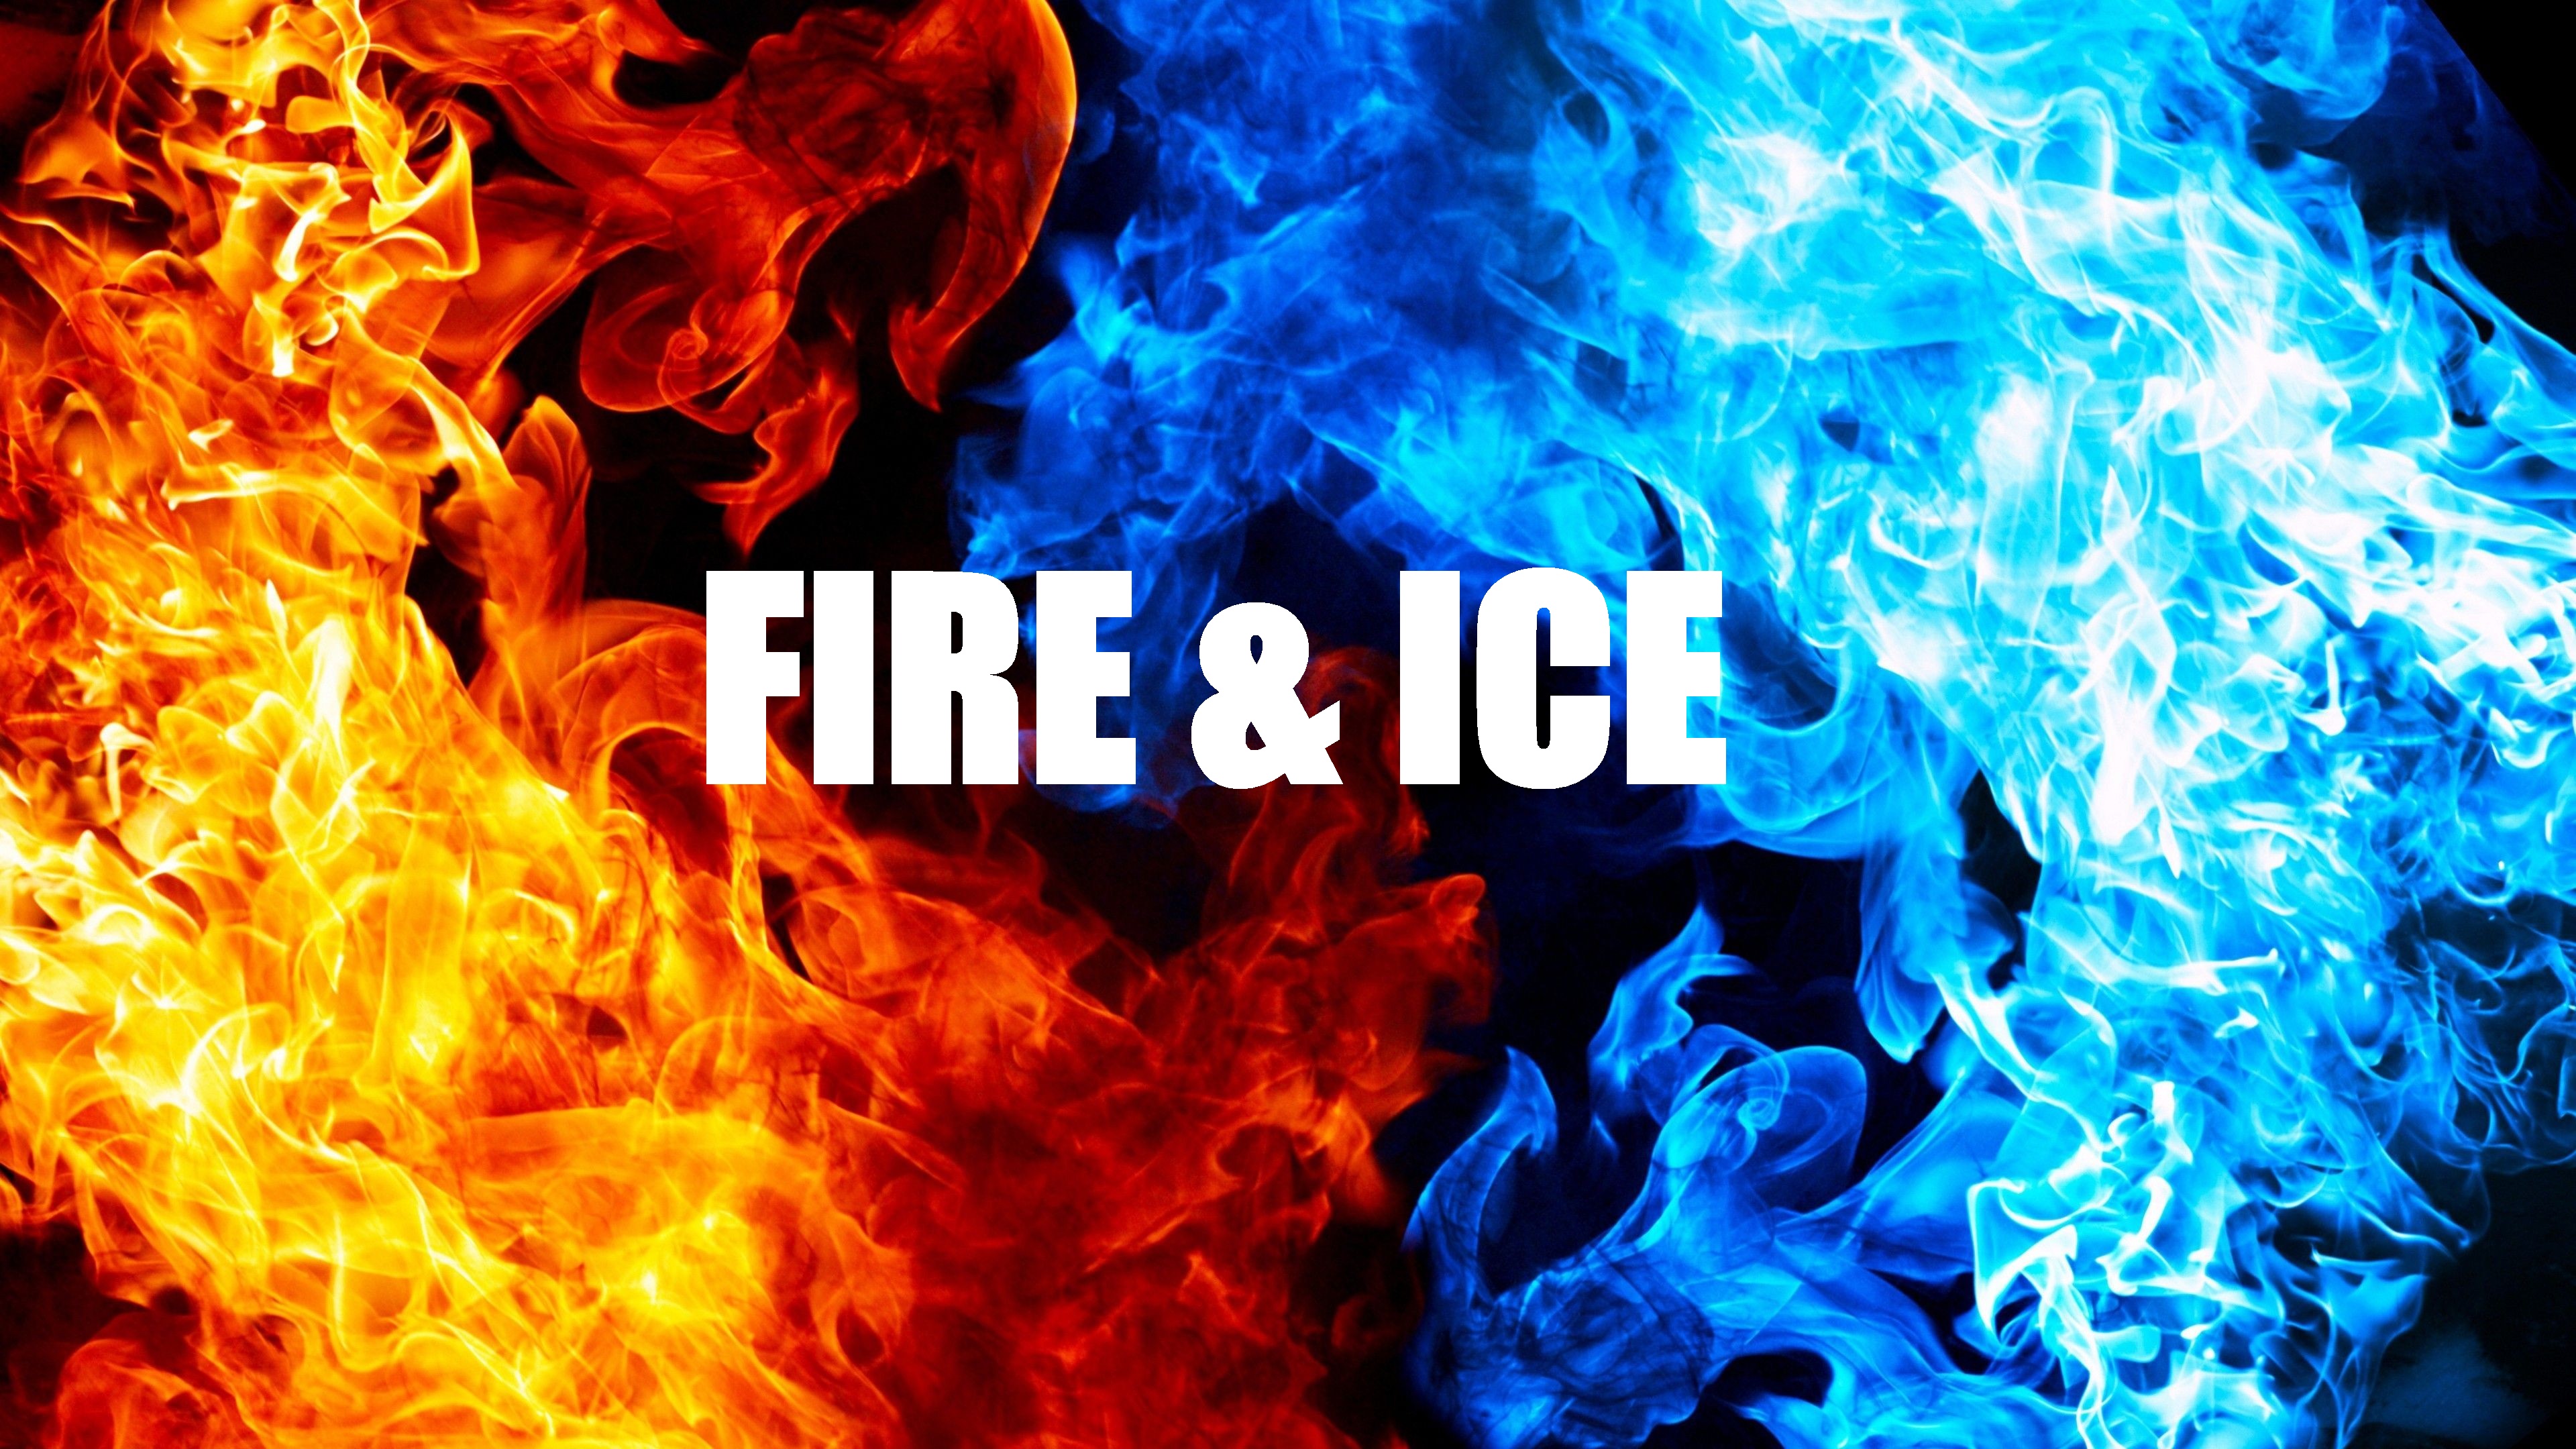 Fire Ice Party 03 01 19